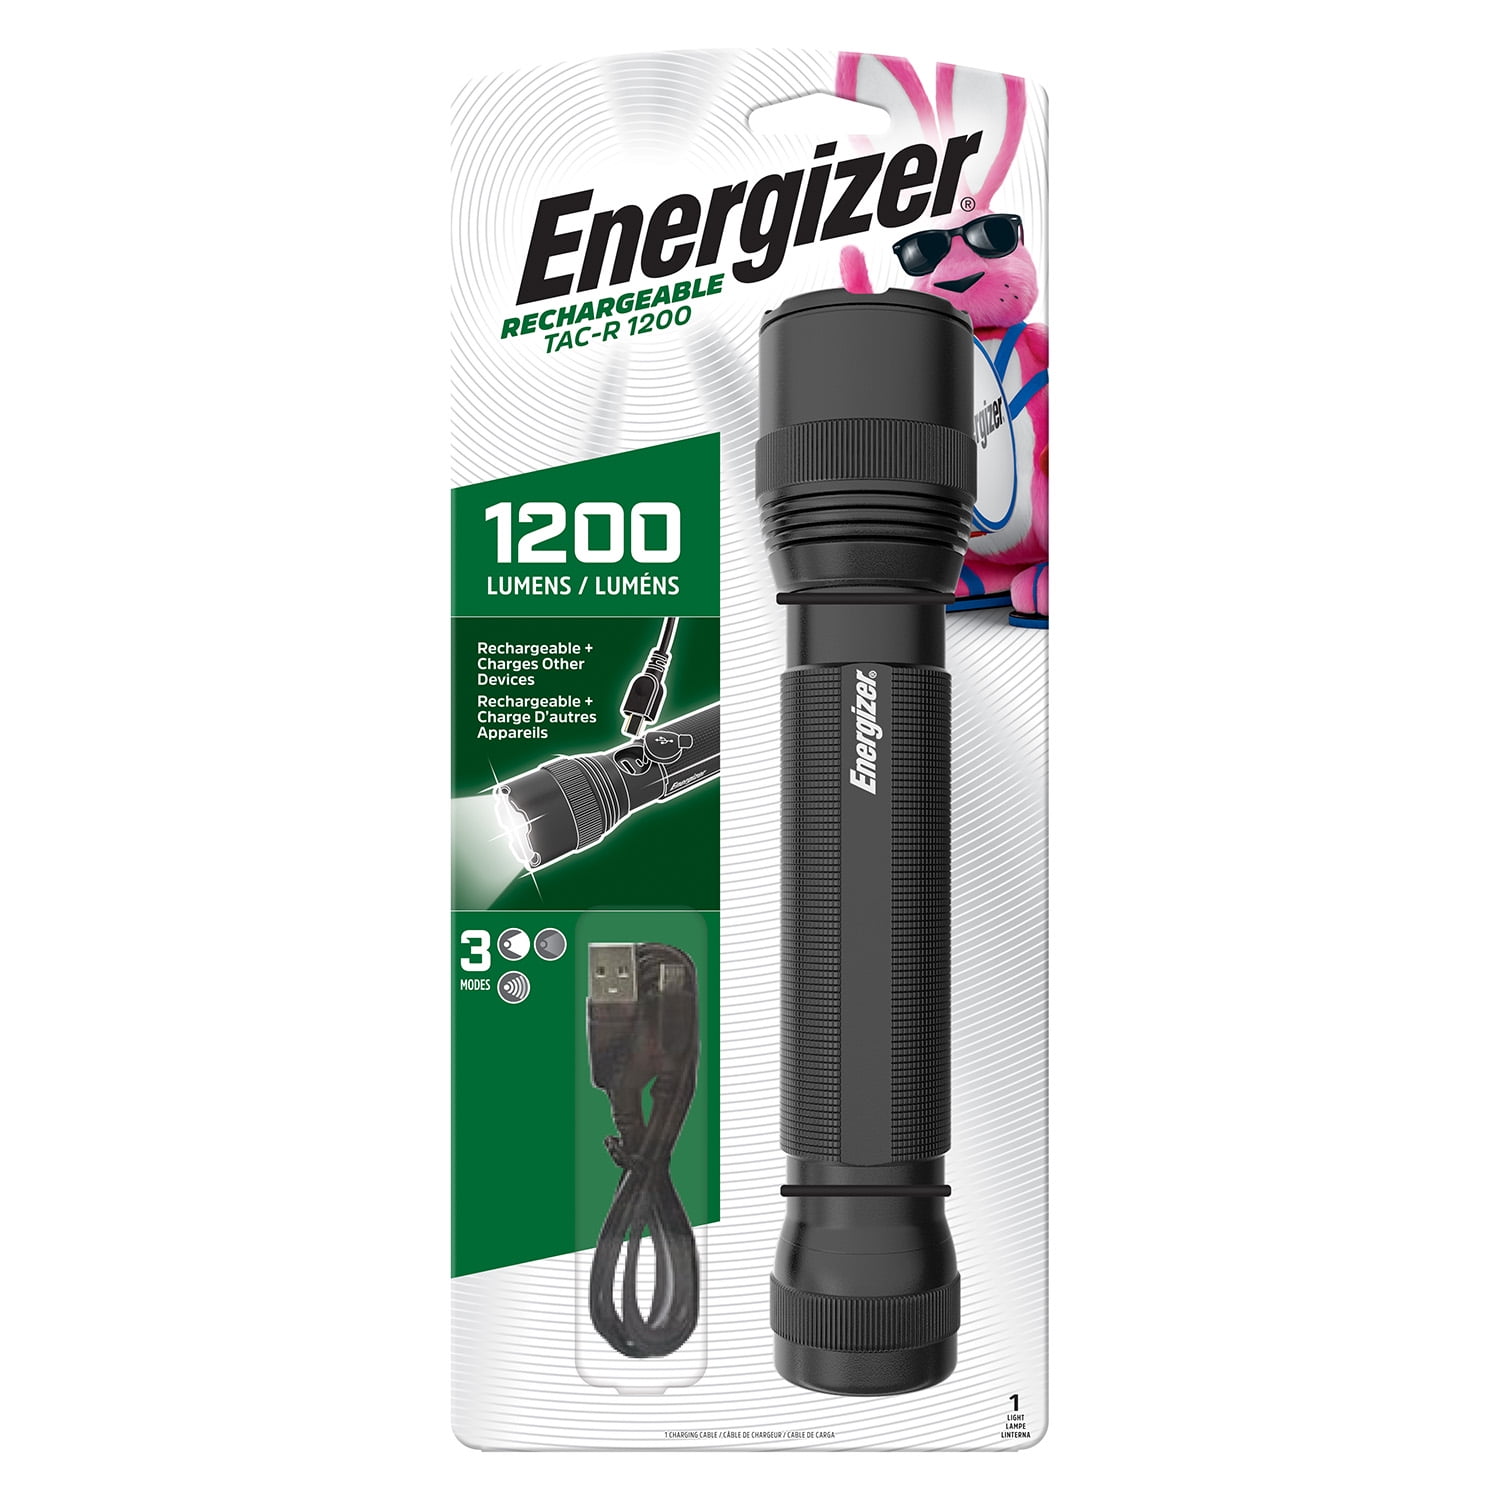 Energizer TAC R 1200 Rechargeable Tactical Flashlight, 1200 Lumens, IPX4 Water  Resistant, Aircraft-Grade Aluminum LED Flashlight, Outstanding Emergency  Light